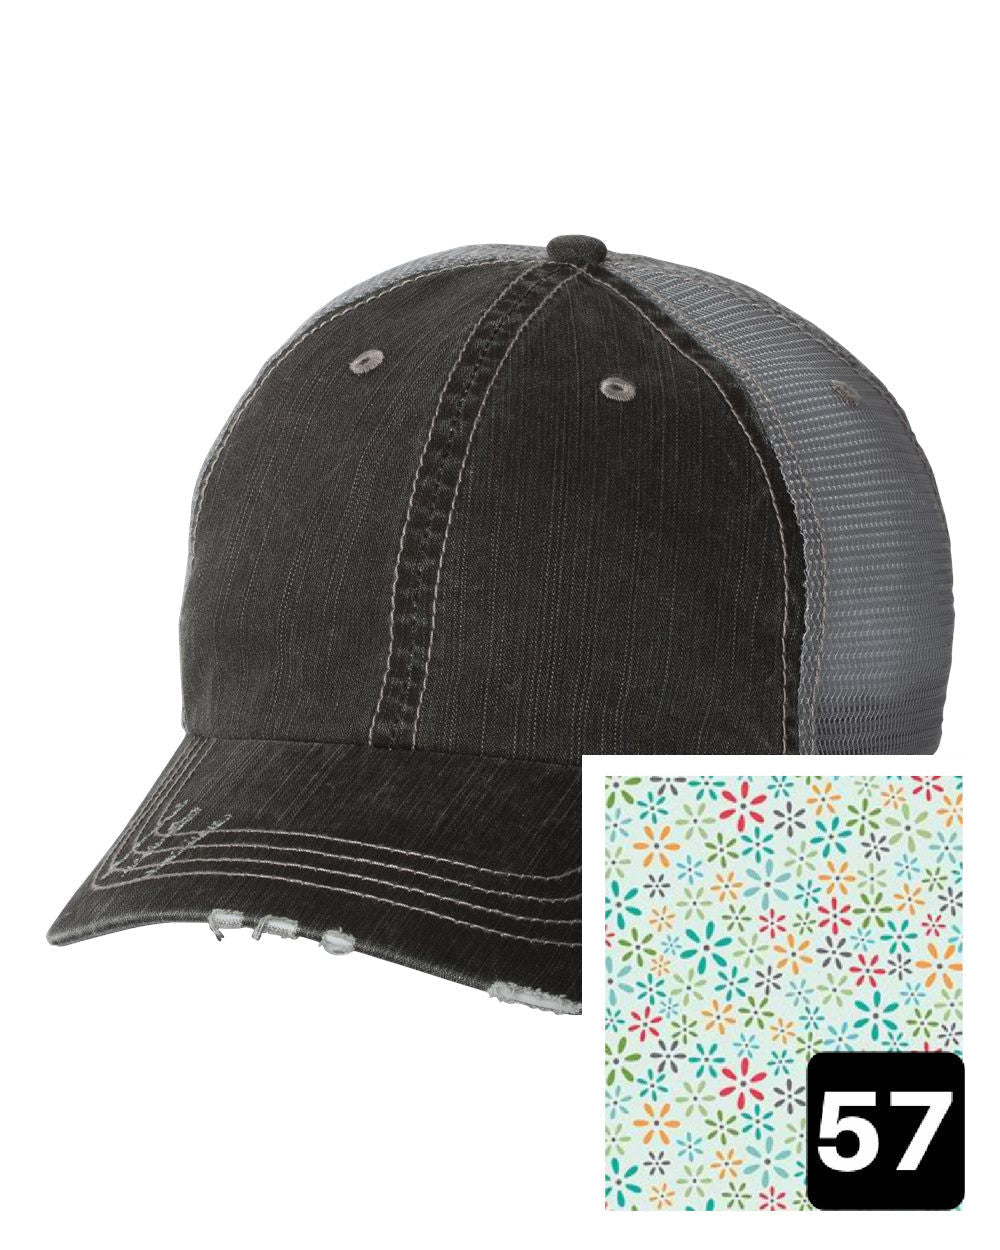 gray distressed trucker hat with white daisy on yellow fabric state of Indiana